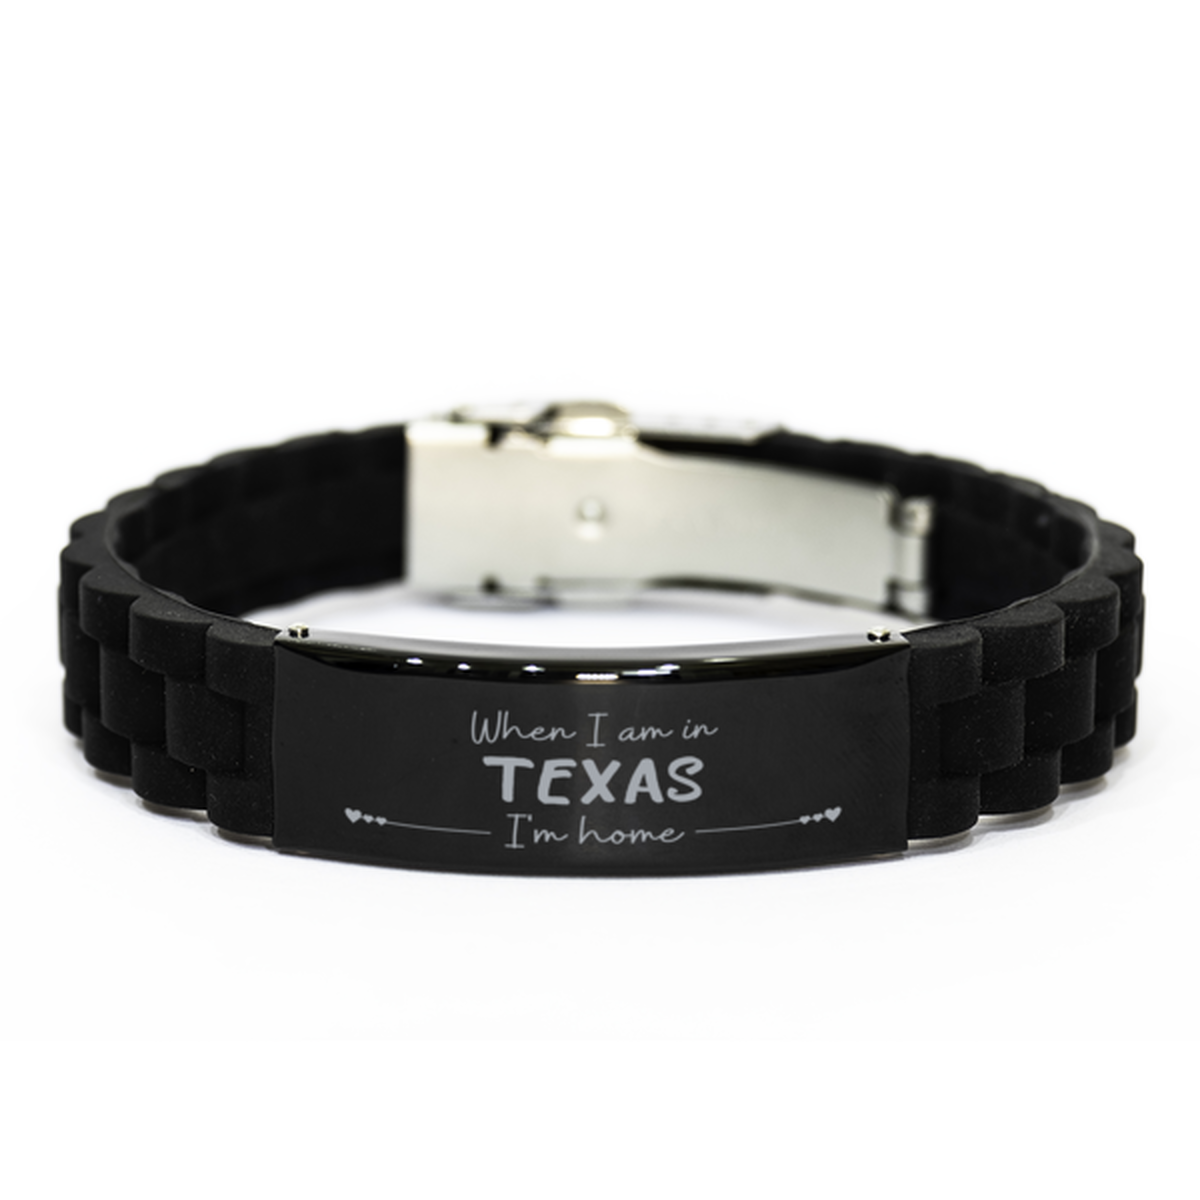 When I am in Texas I'm home Black Glidelock Clasp Bracelet, Cheap Gifts For Texas, State Texas Birthday Gifts for Friends Coworker